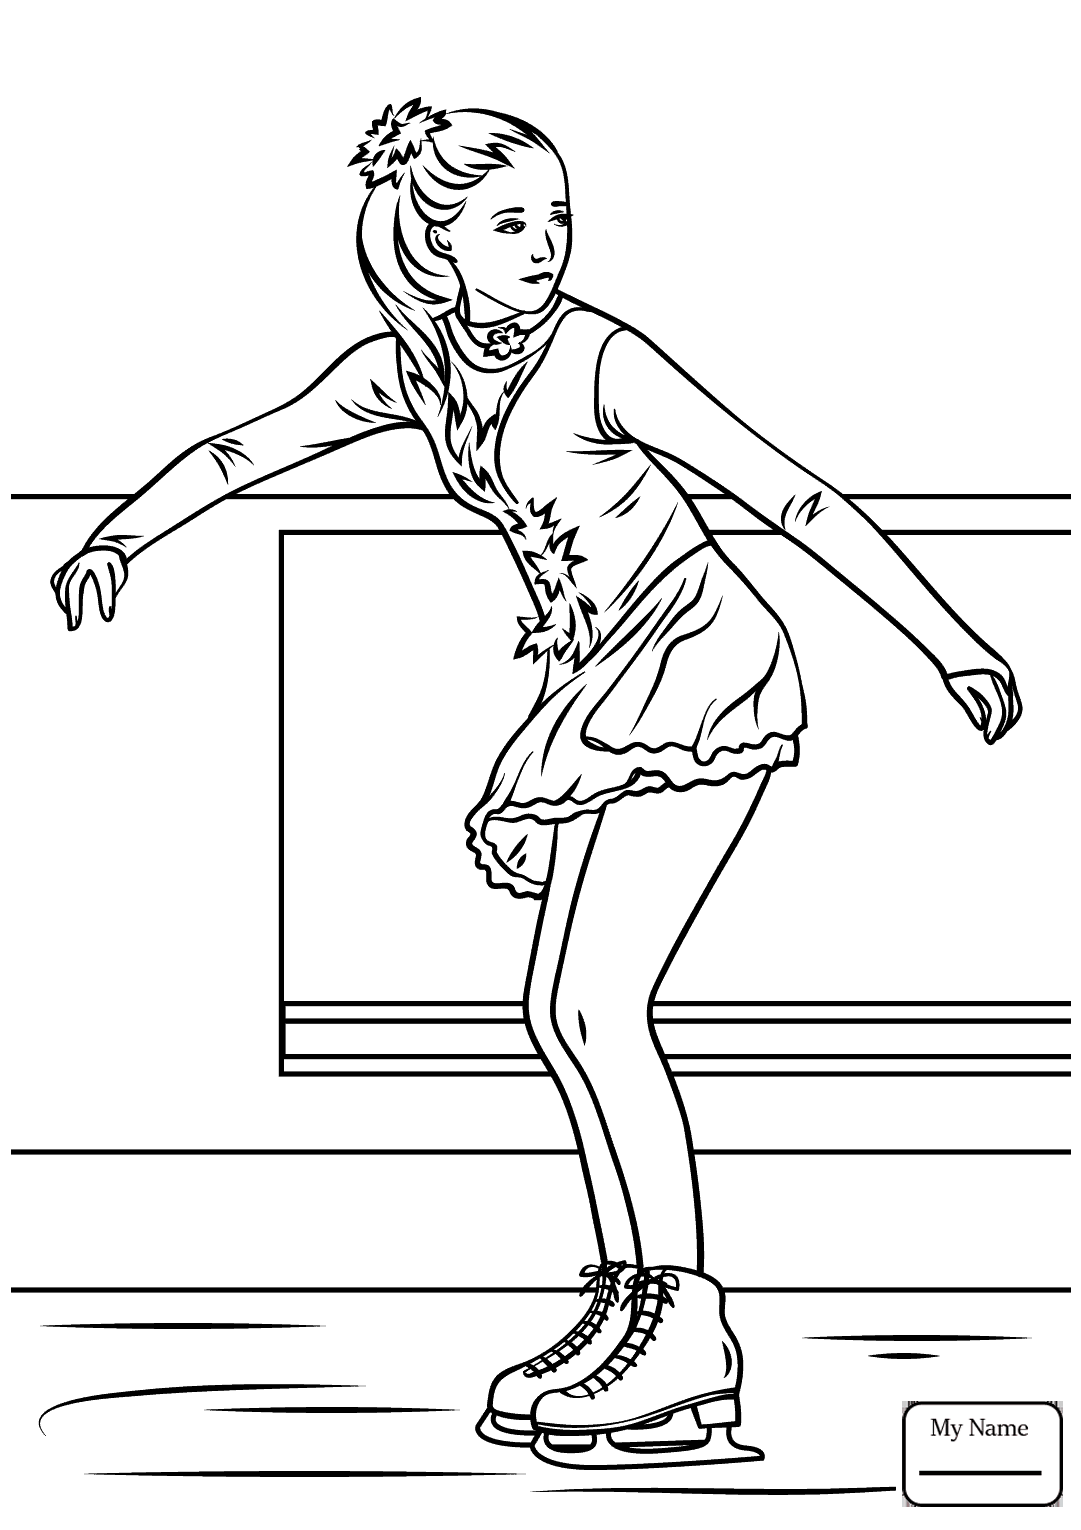 Ice Skating Coloring Pages Learny Kids